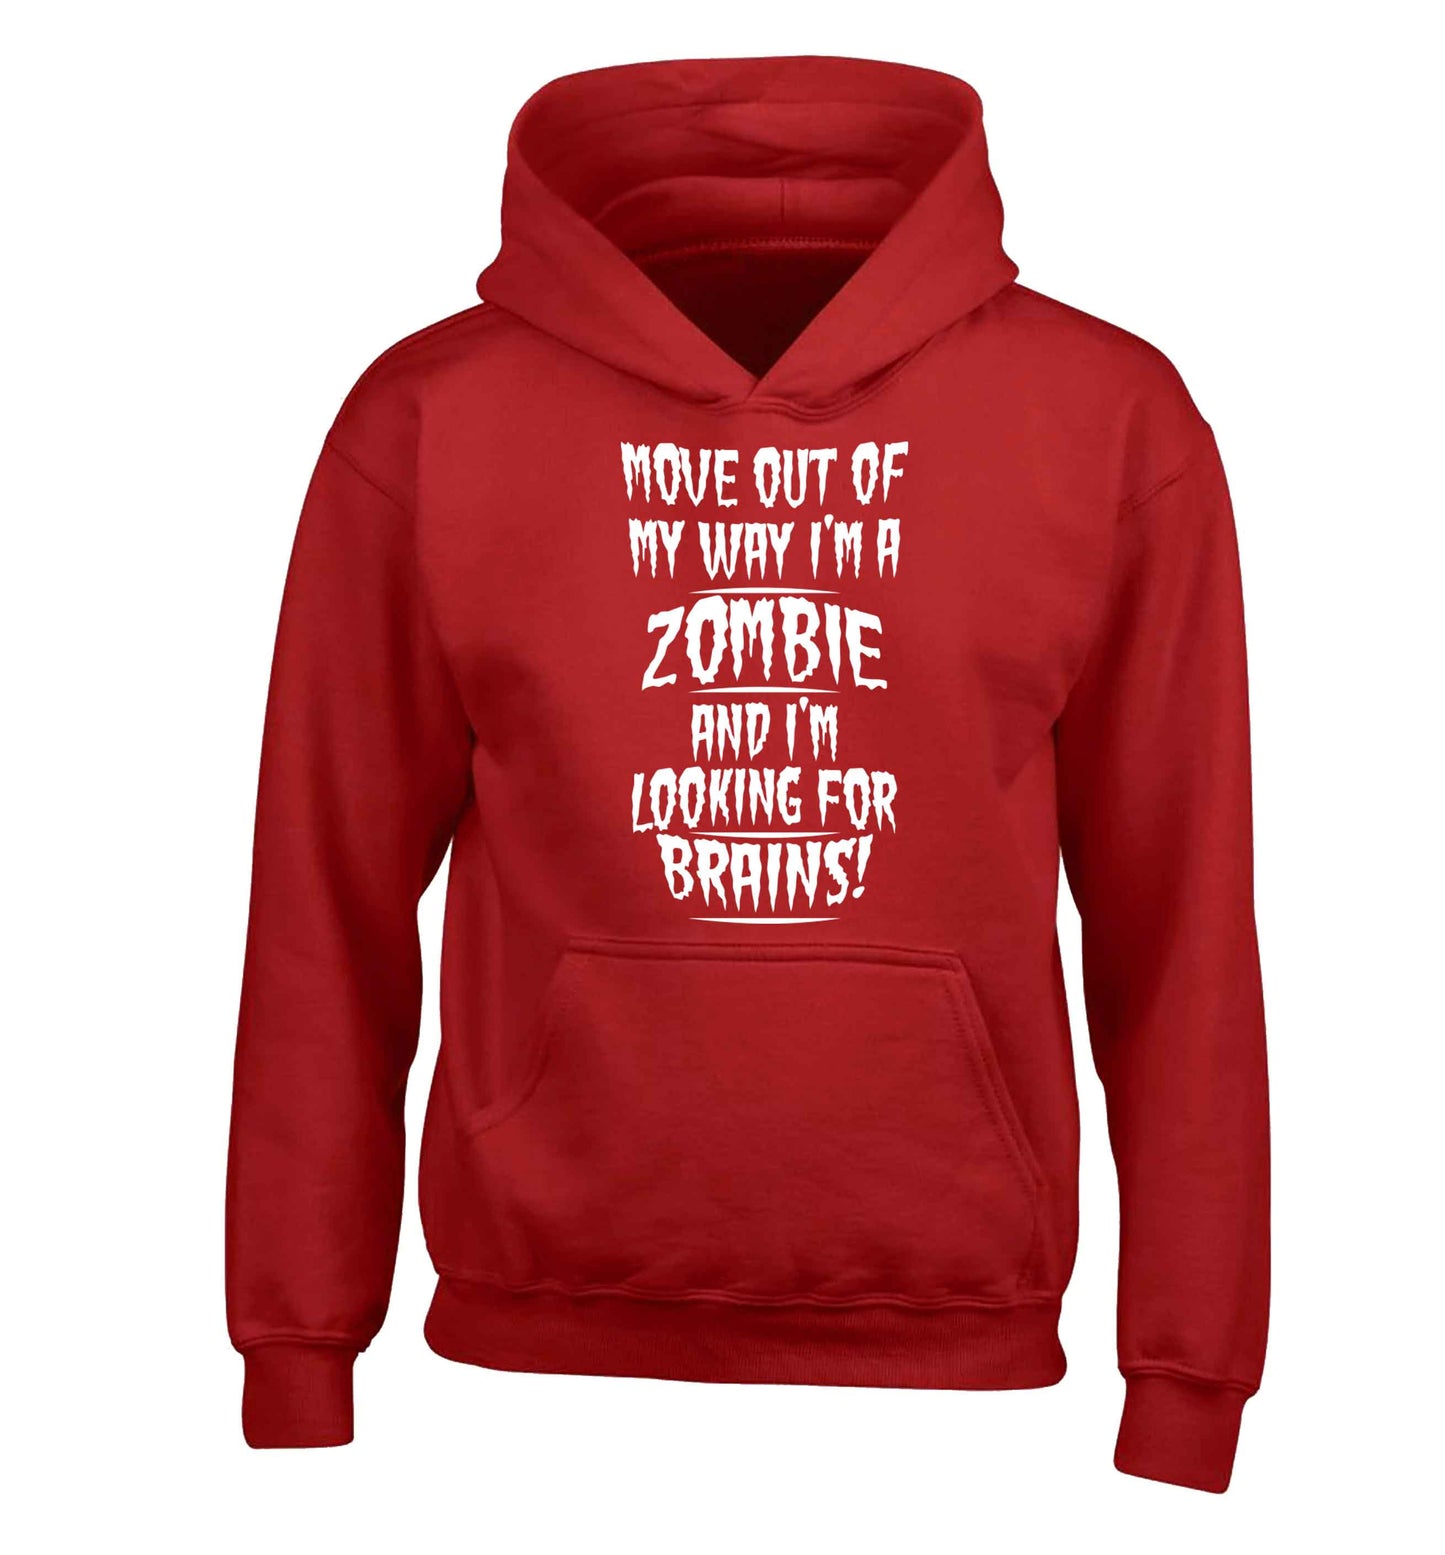 I'm a zombie and I'm looking for brains! children's red hoodie 12-13 Years